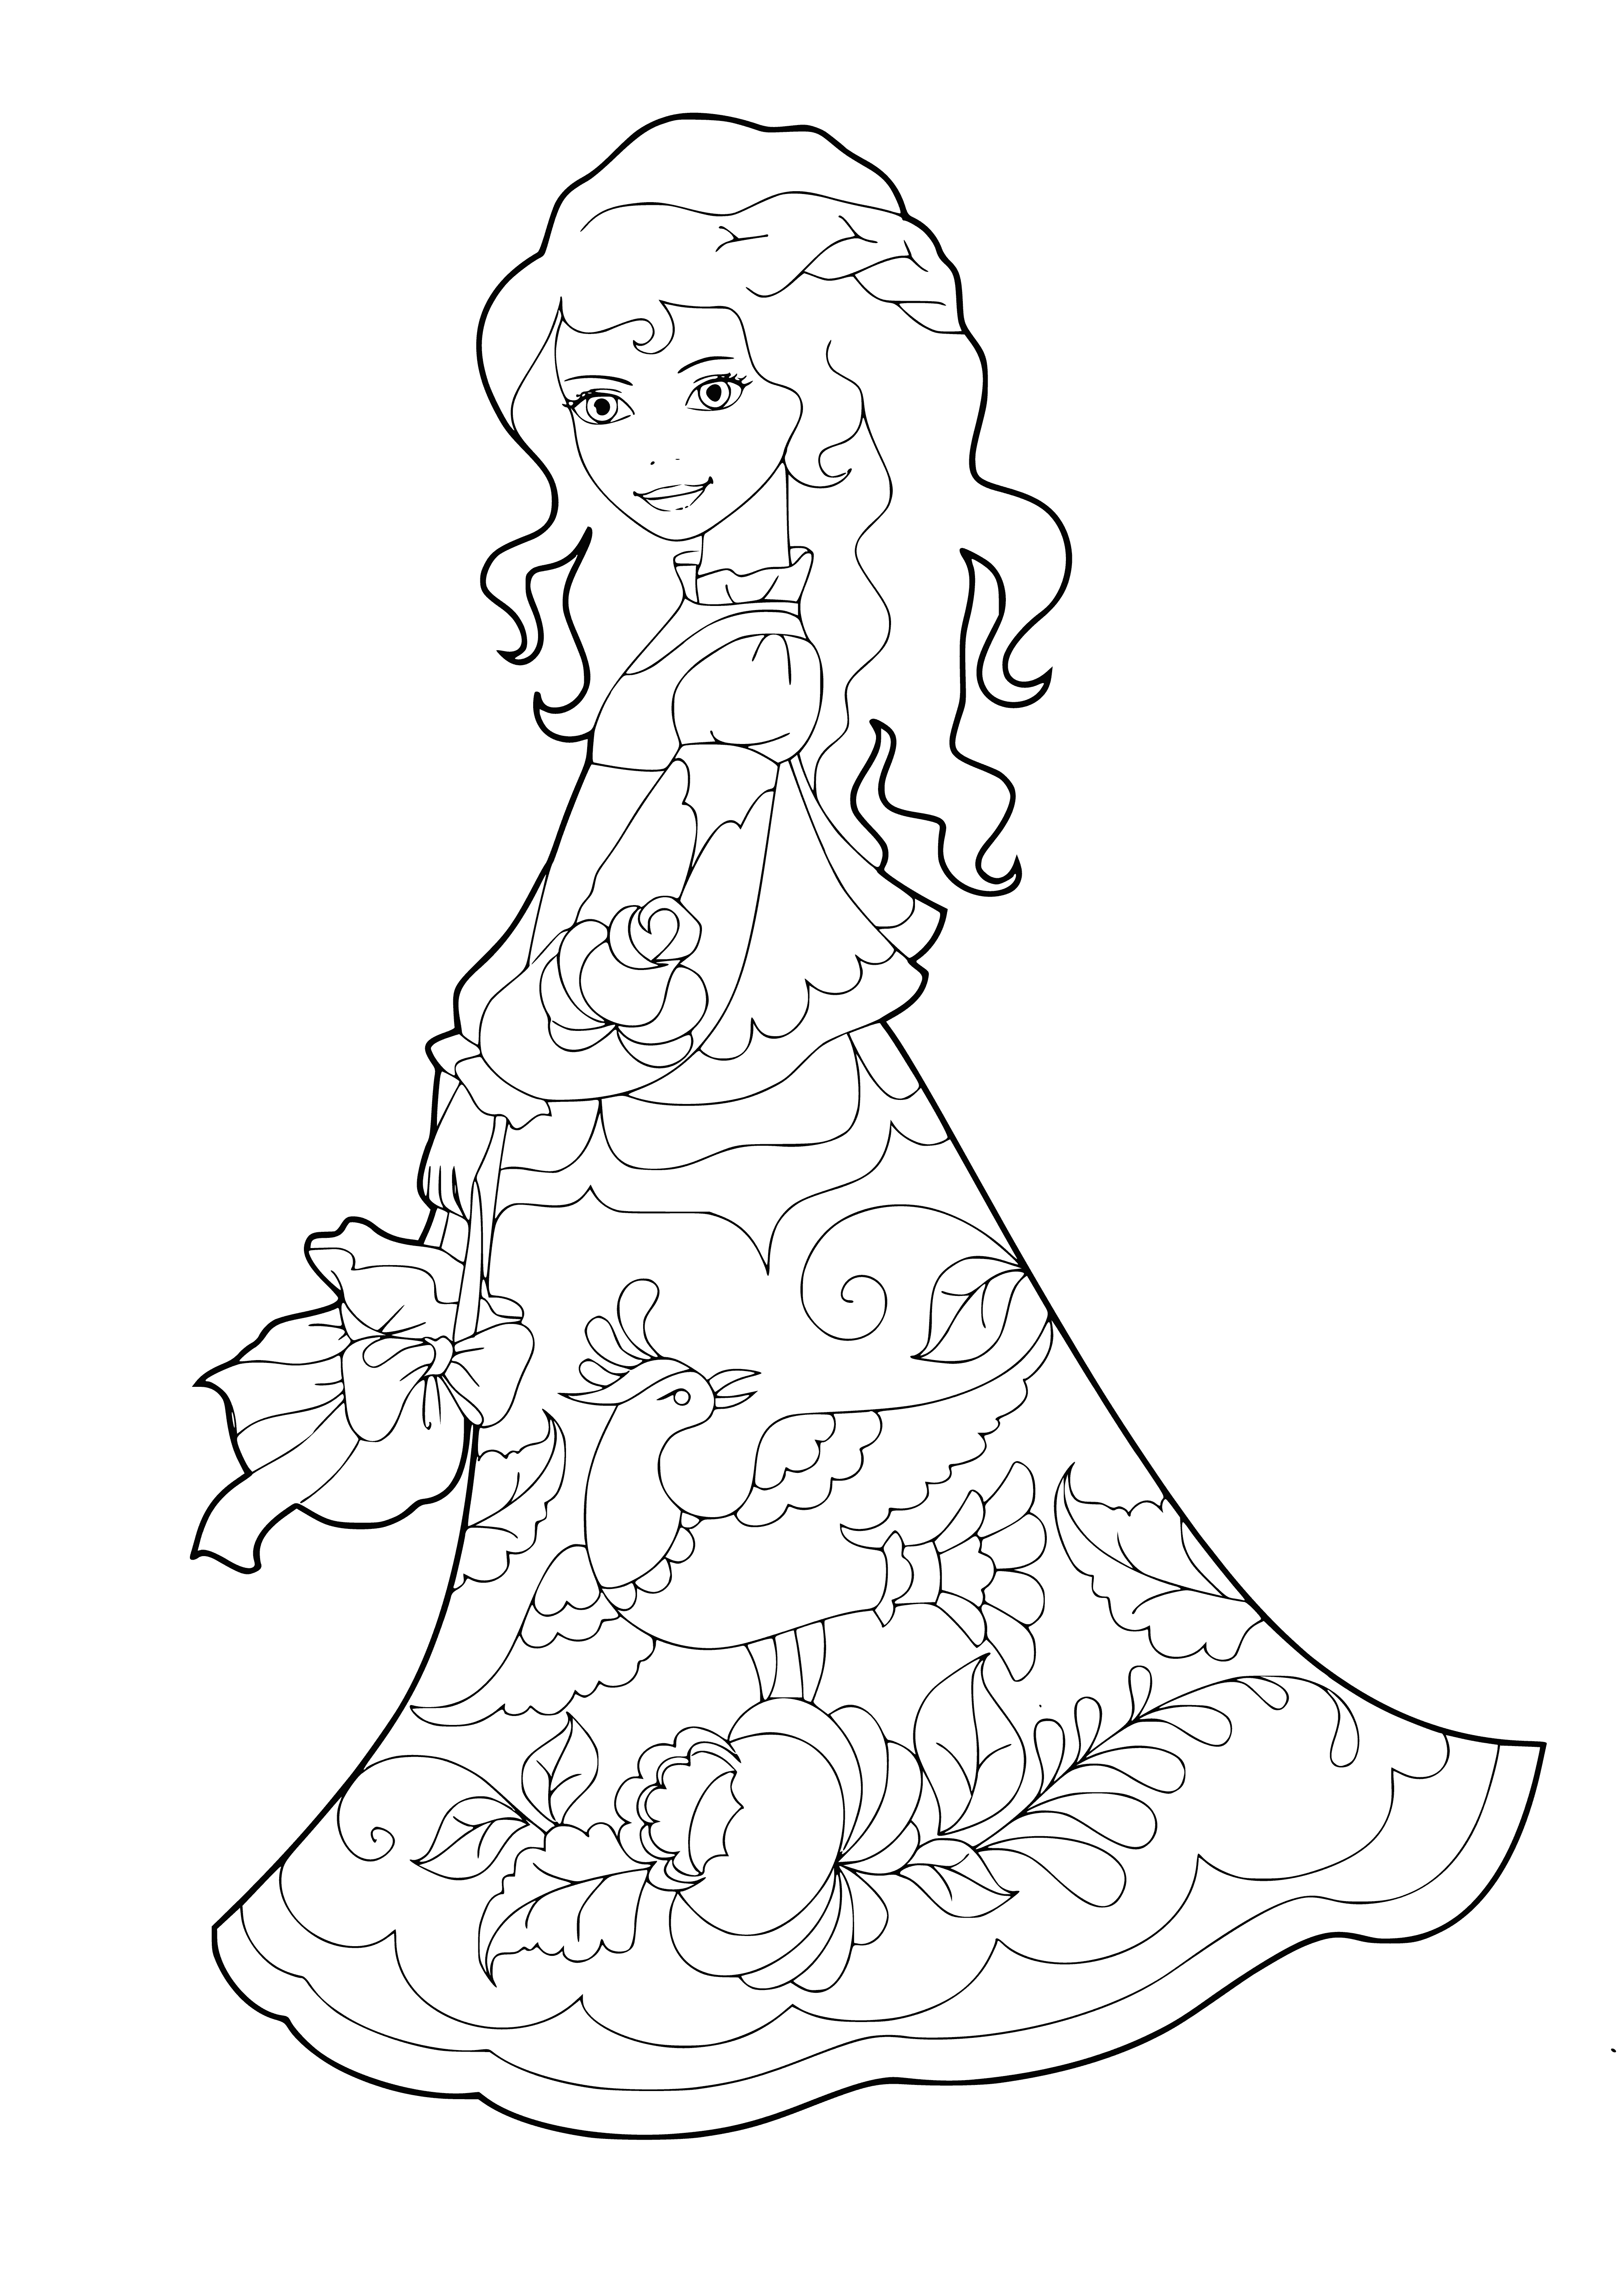 coloring page: Two Russian beauties, blond & blue-eyed, wearing white dresses w/ floral patterns; one sitting & one standing, both smiling.